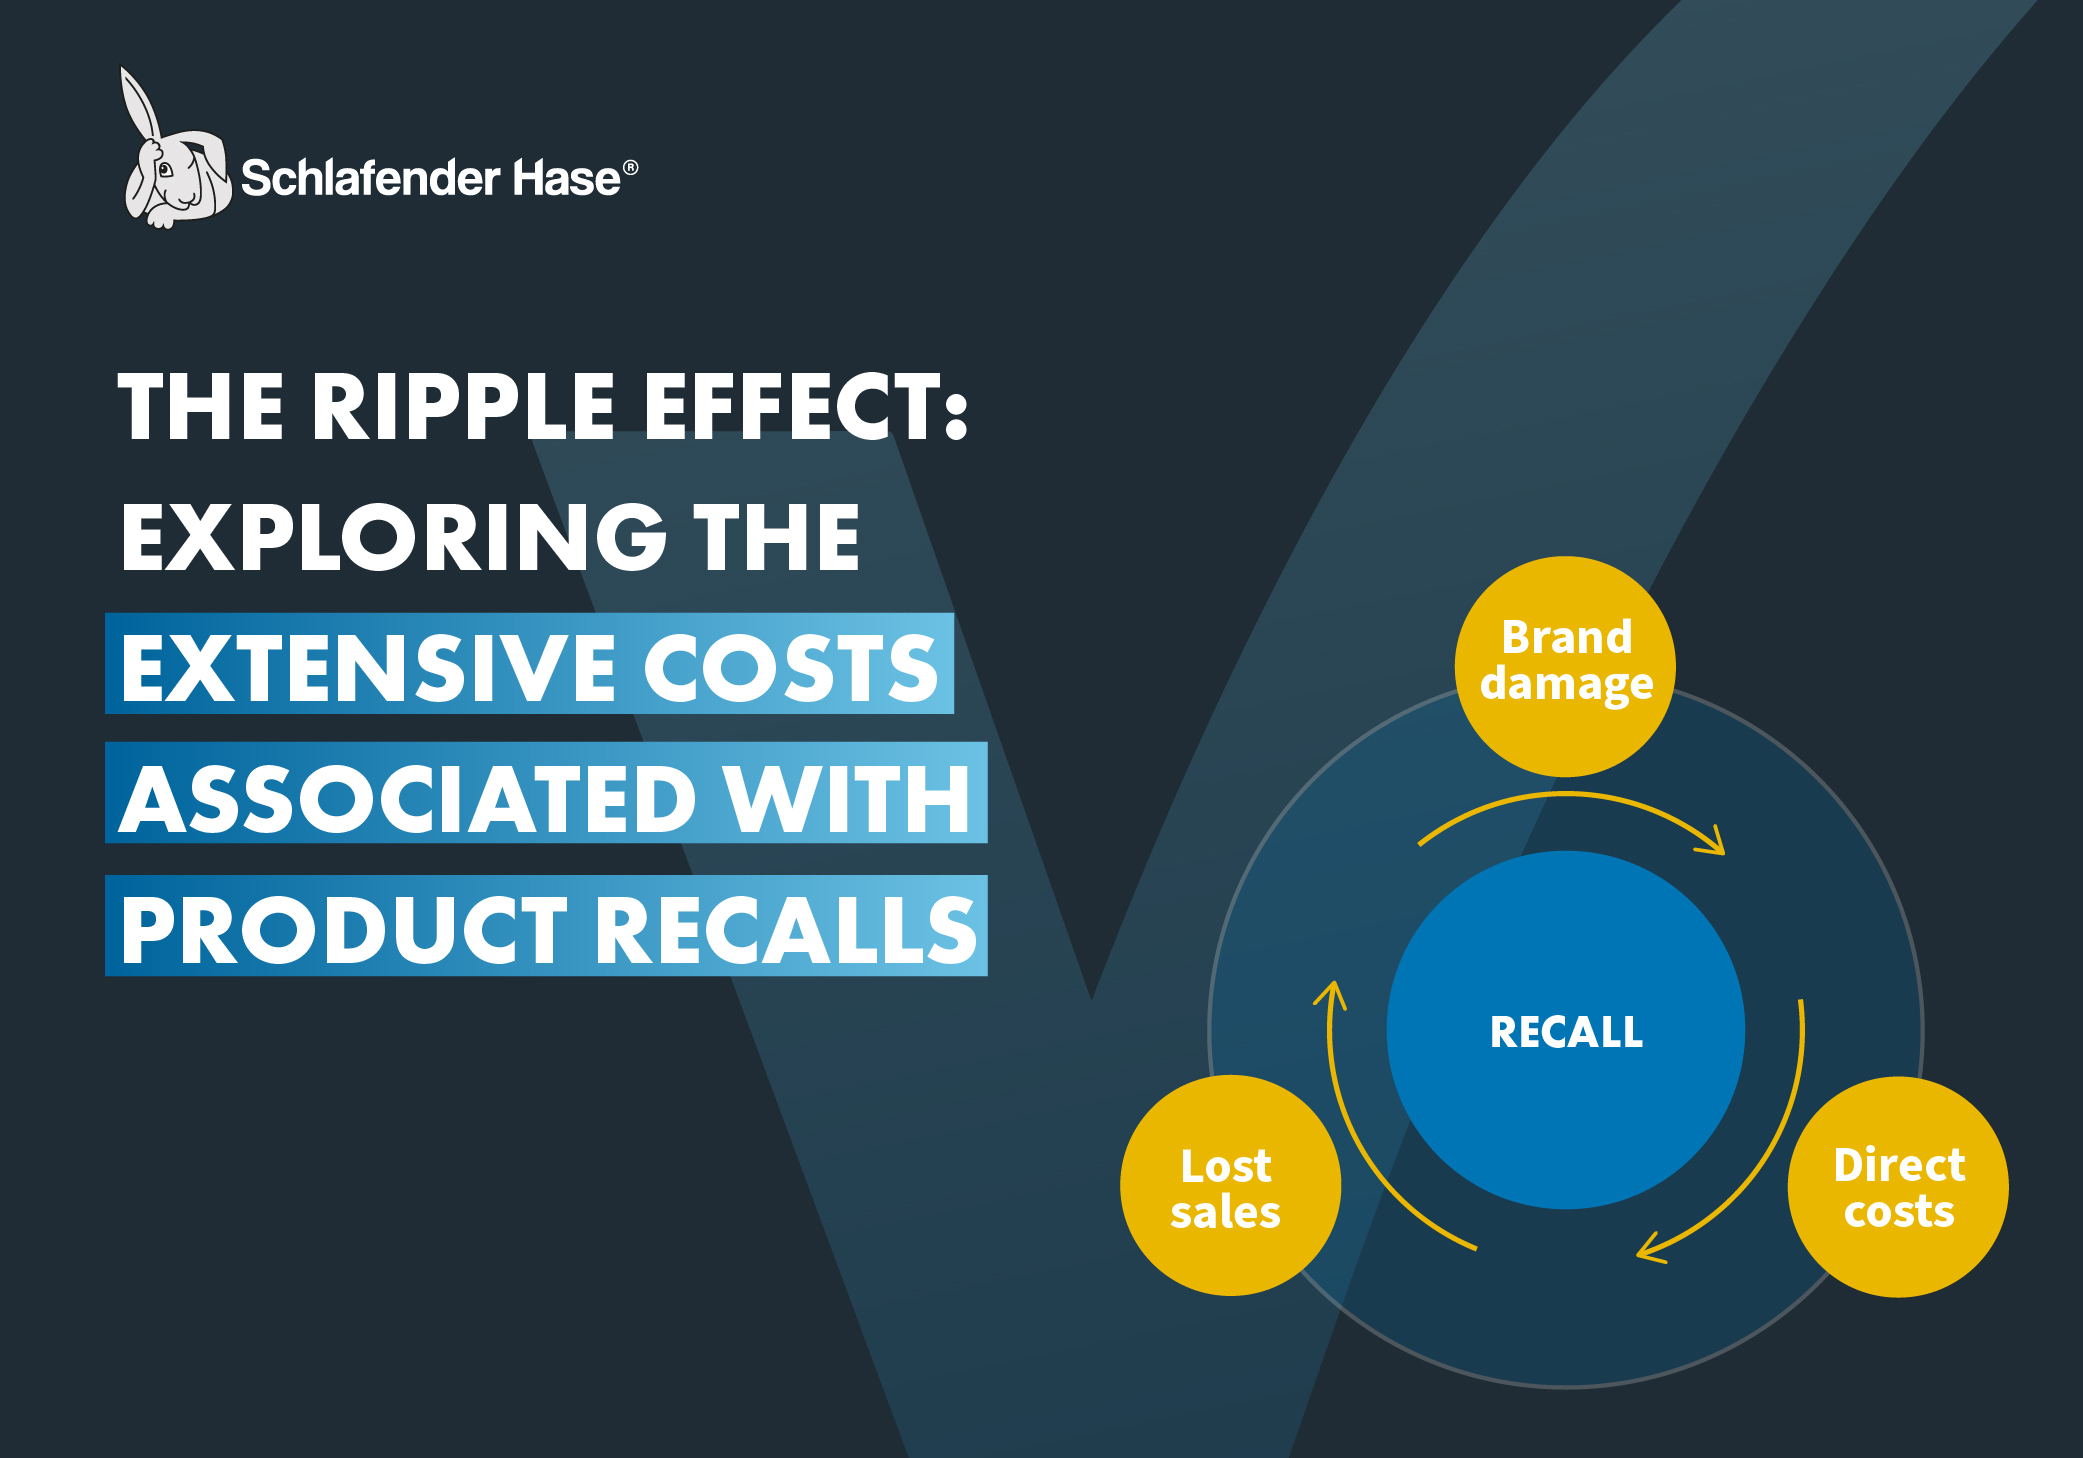 Exploring the extensive costs associated with product recalls